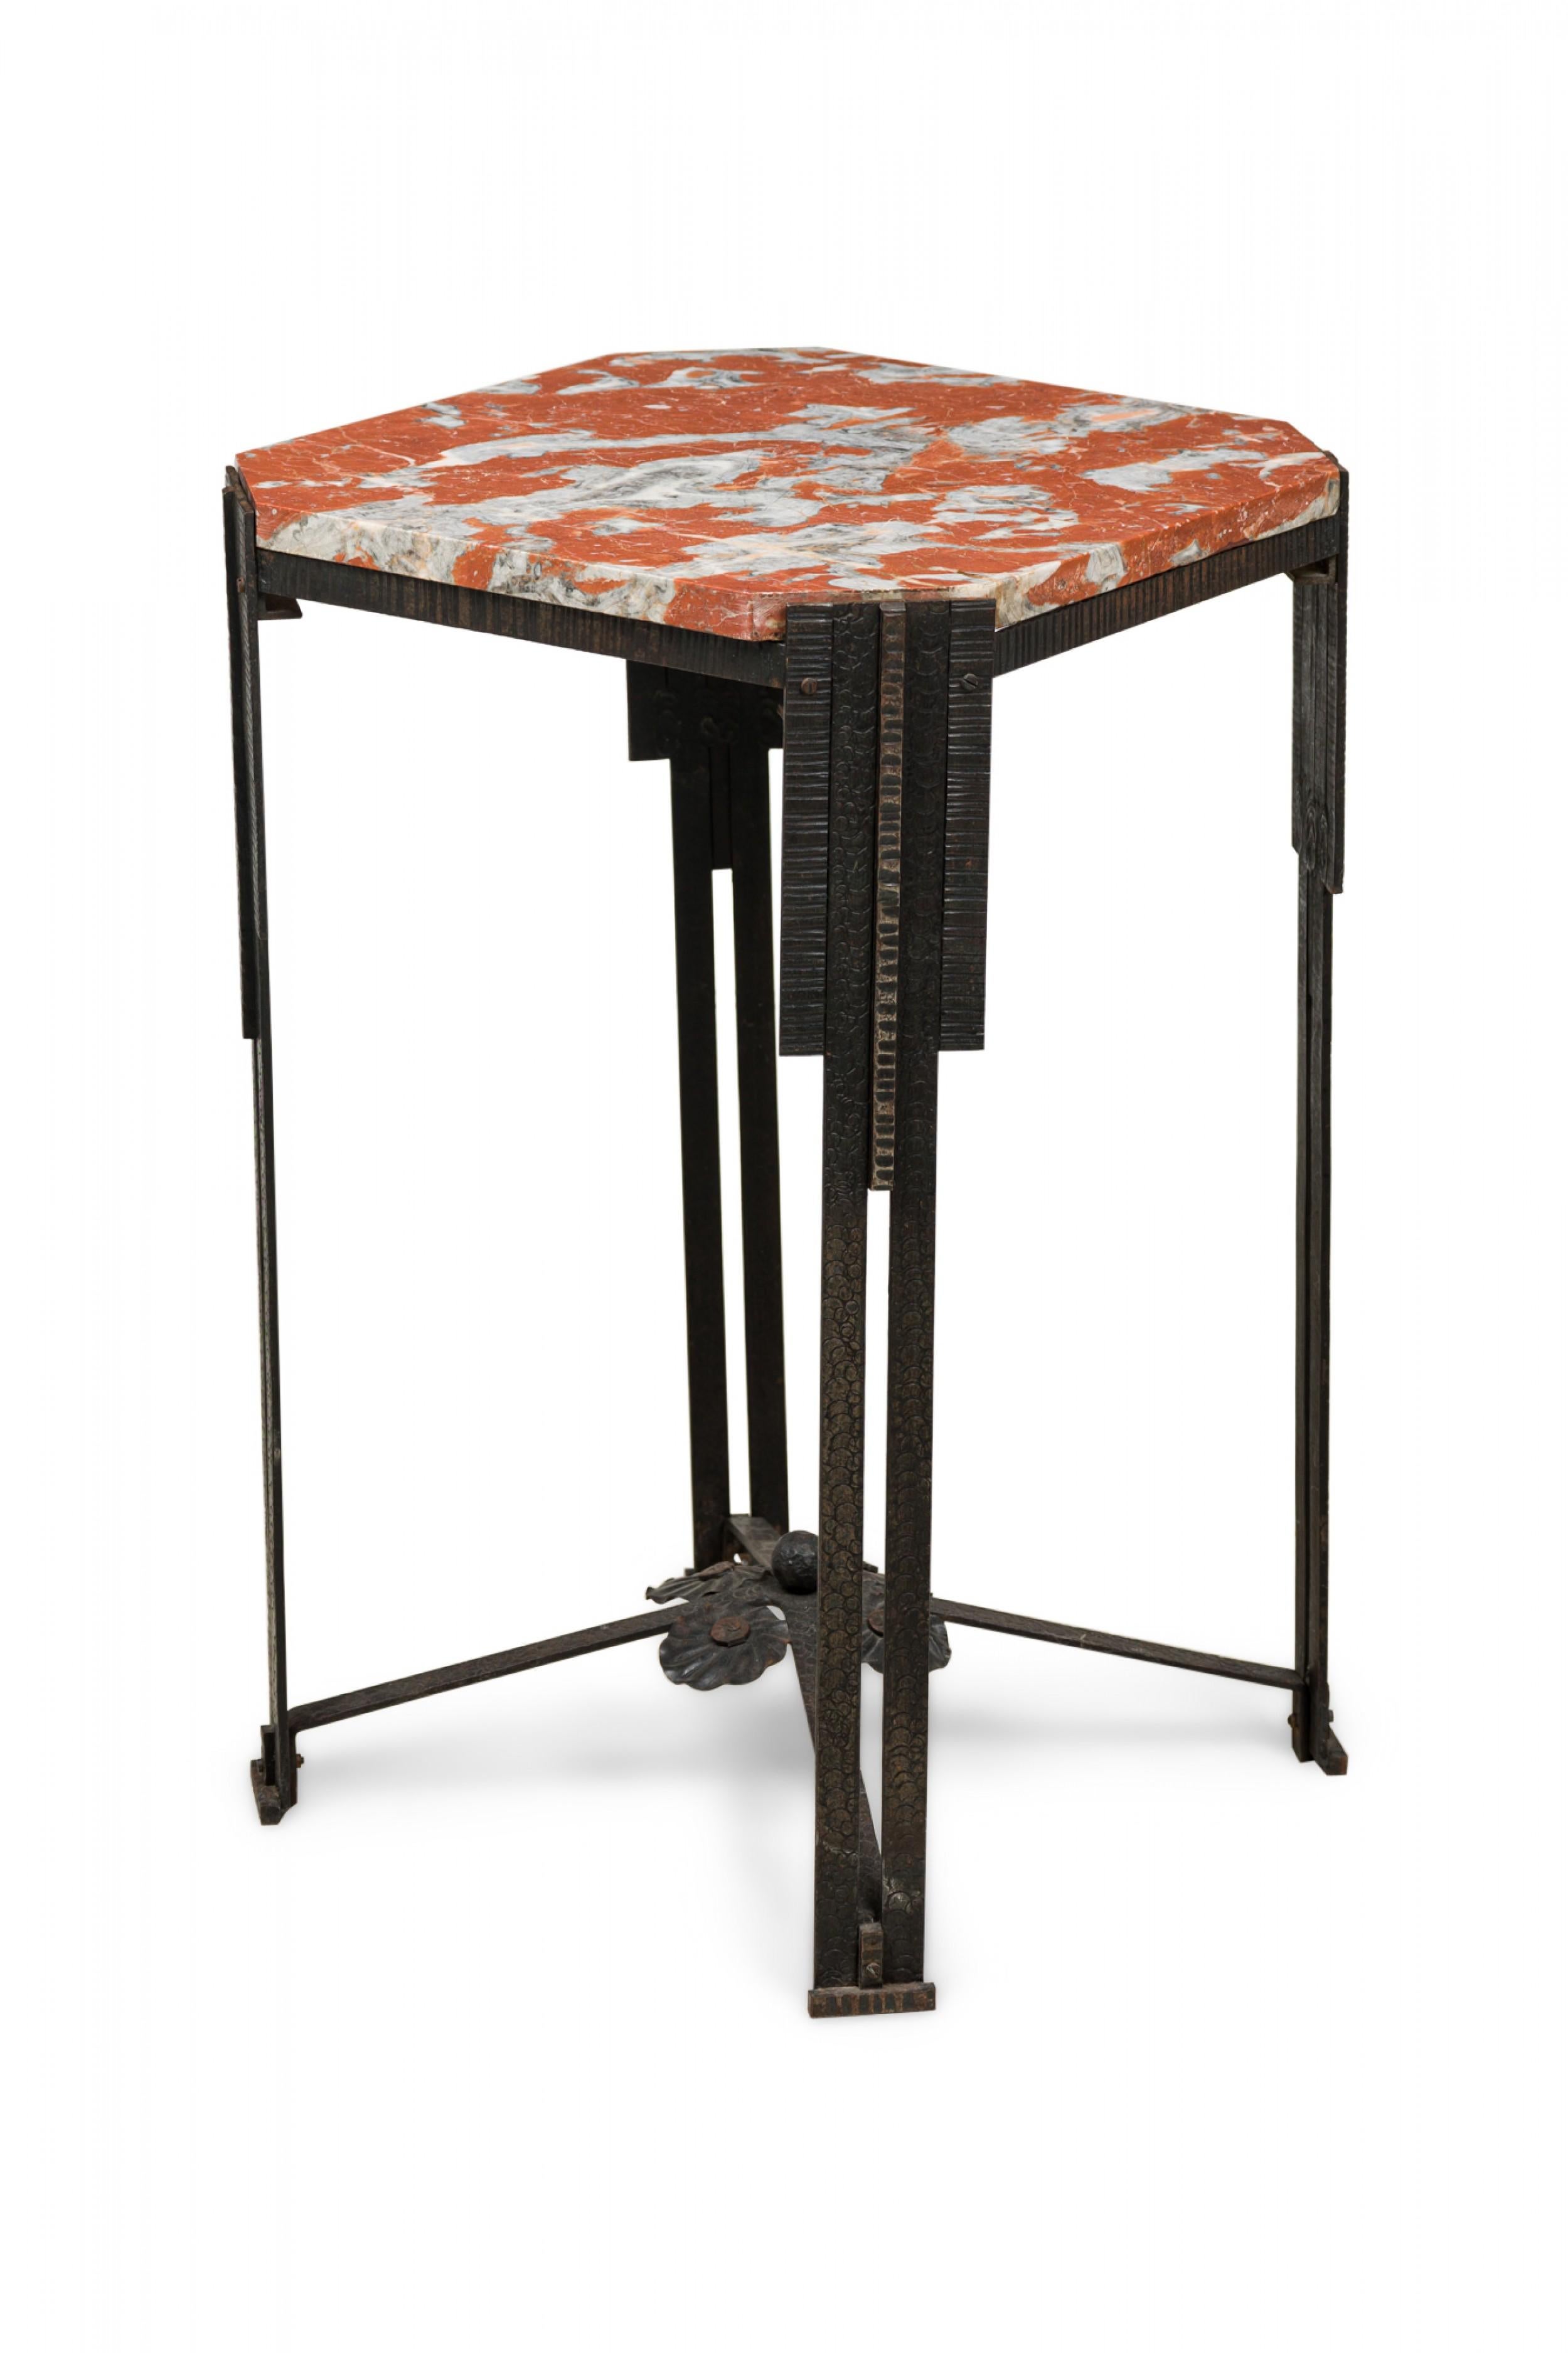 20th Century Art Deco French Hammered Steel and Blush Marble-Top Table For Sale